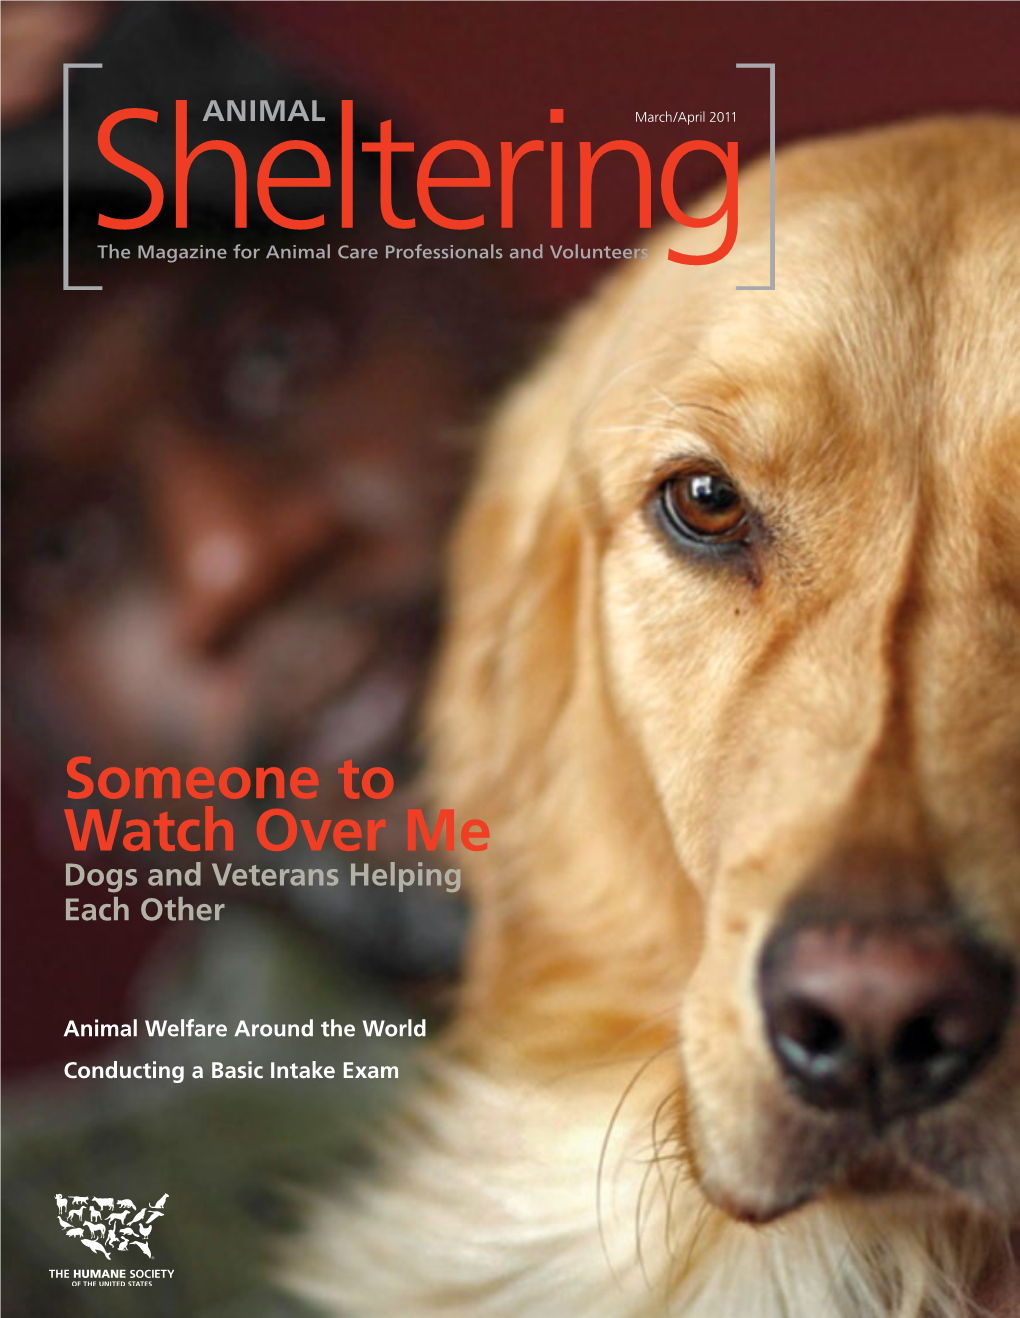 MARCH/APRIL 2011 ANIMALSHELTERING.ORG It’S All About Me Promoting Safe Environments While Ending Cross-Contamination